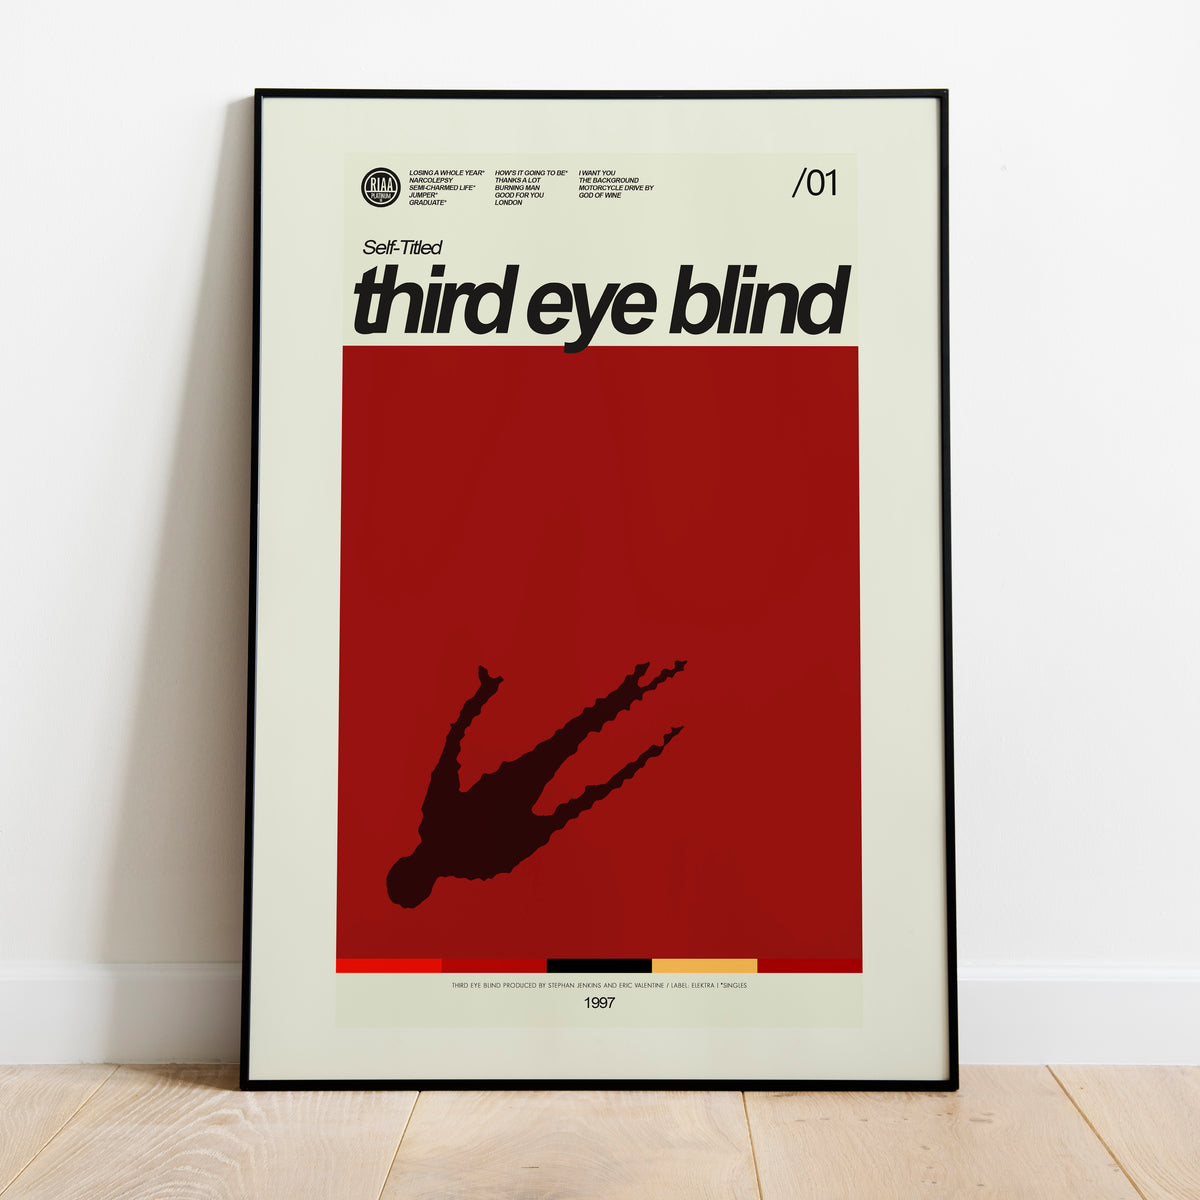 Third Eye Blind - Self-Titled (album) Inspired | 12"x18" or 18"x24" Print only